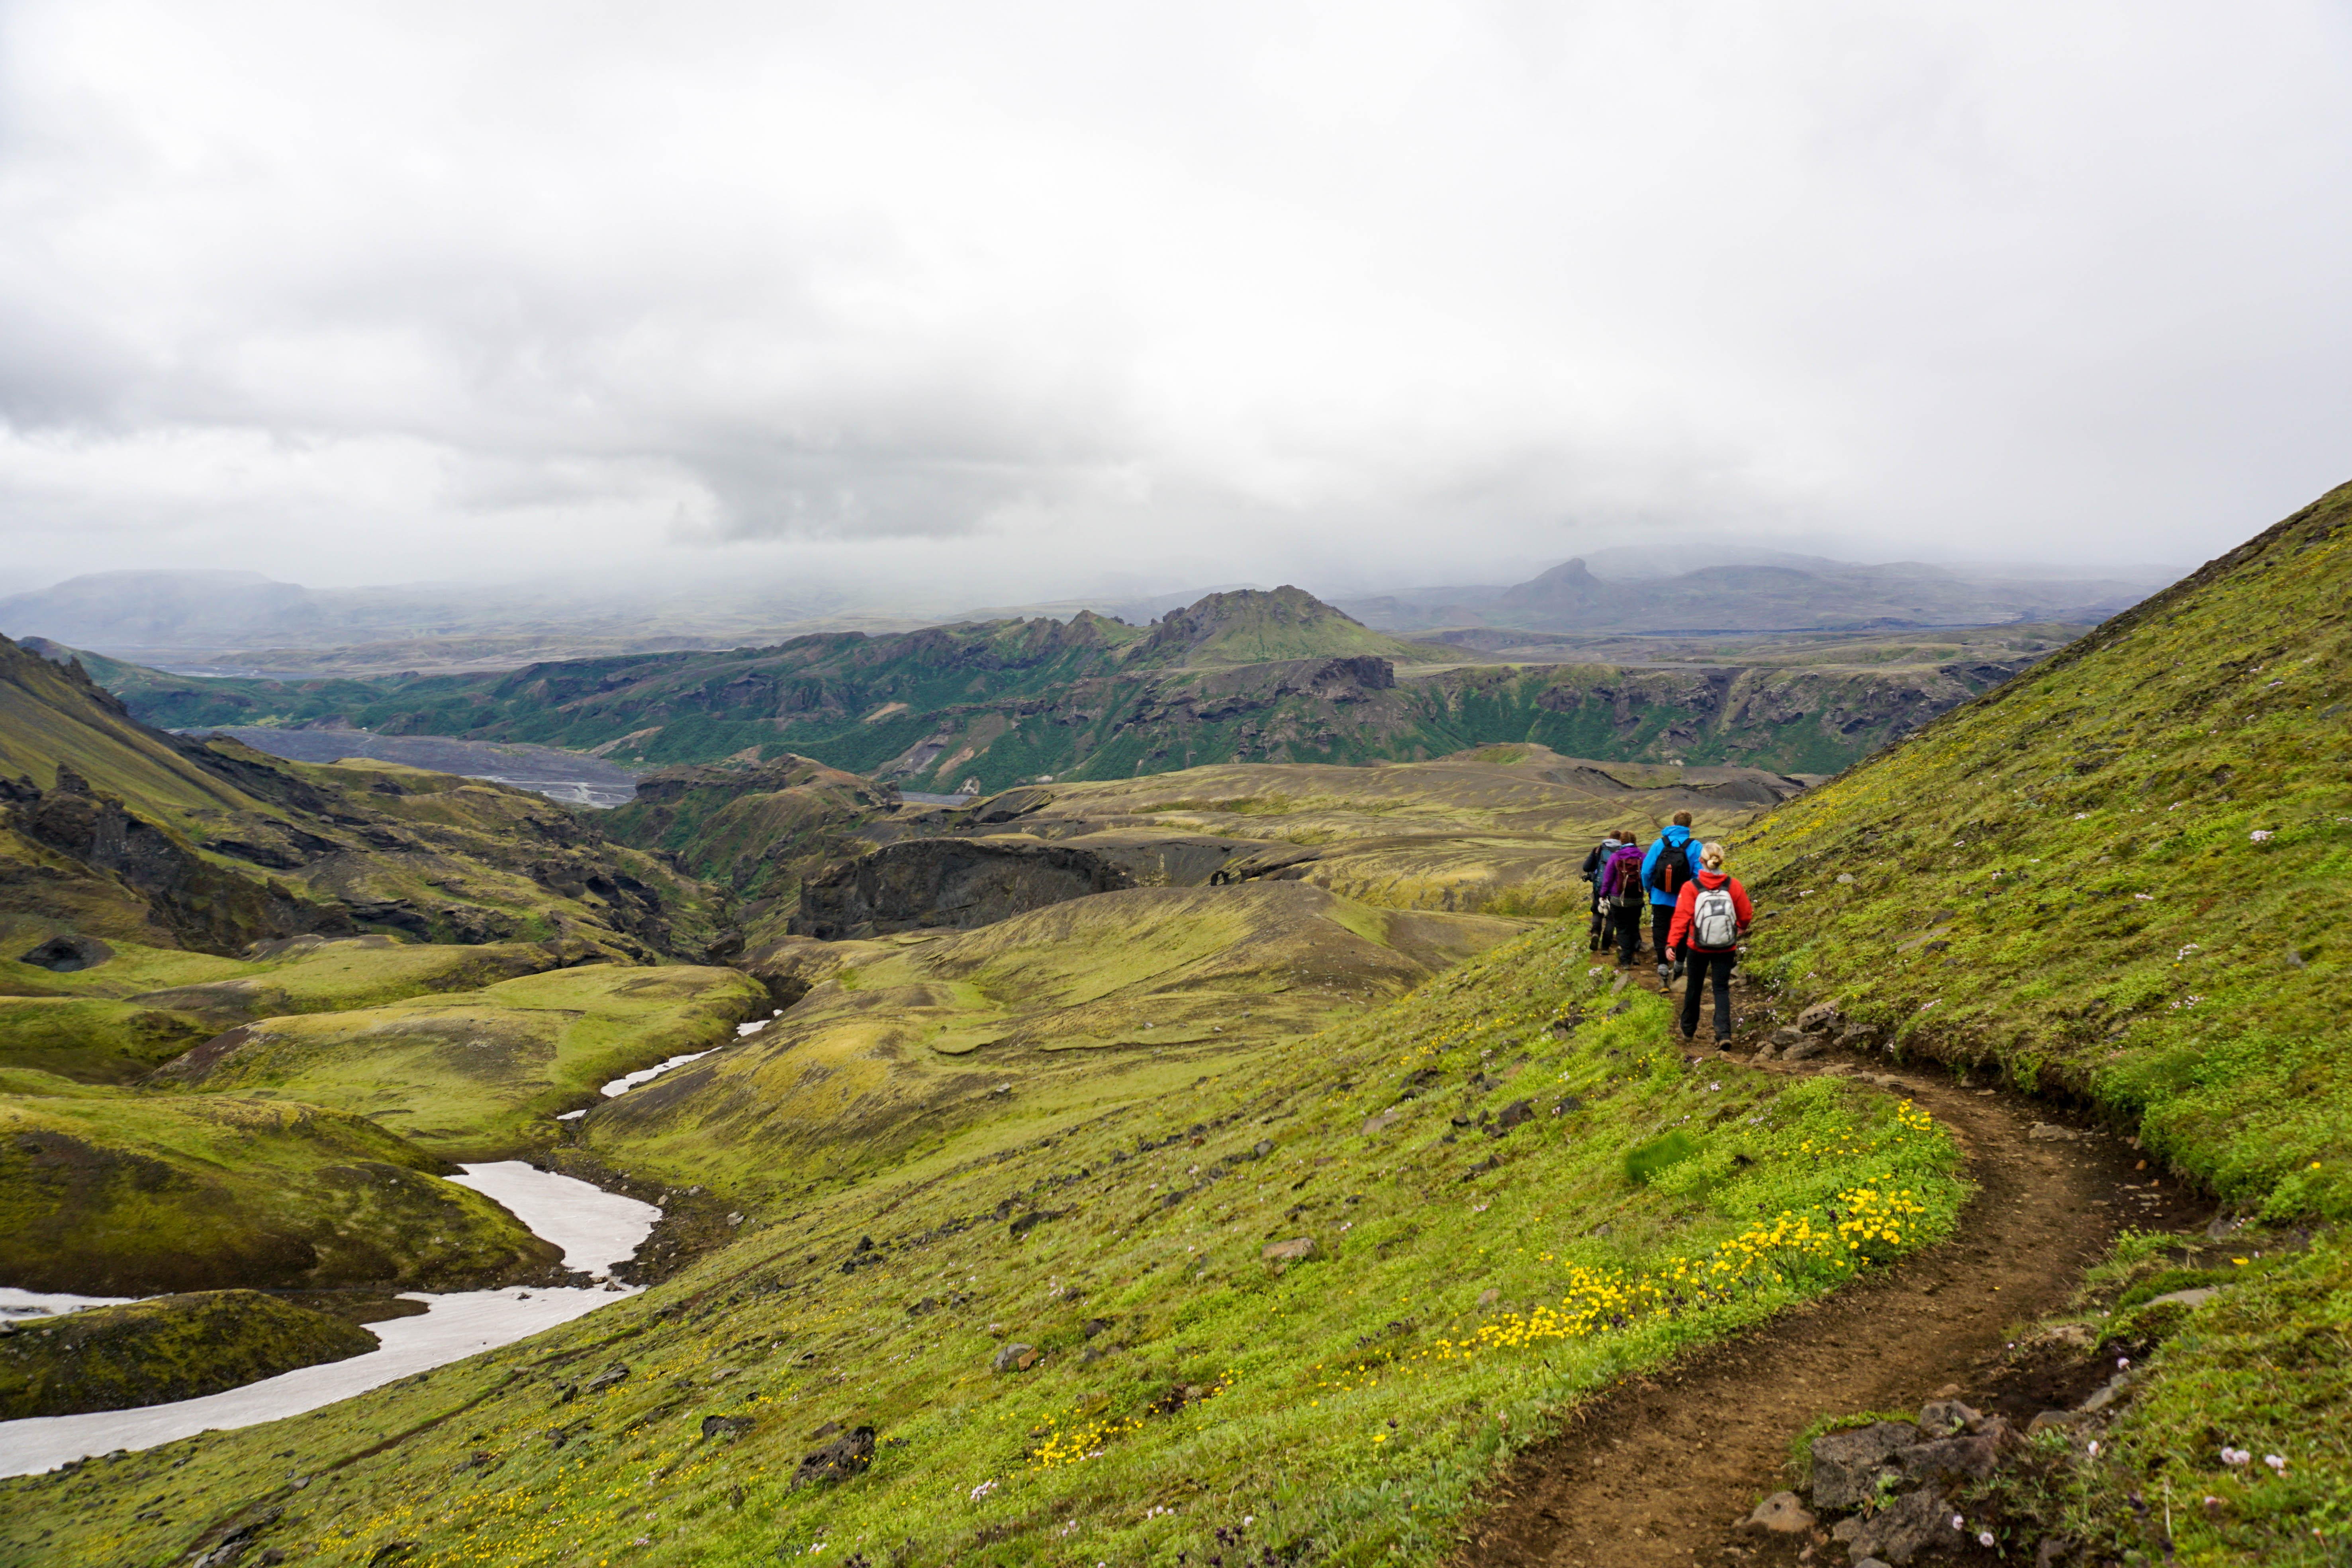 Hiking Fimmvörðuháls this weekend was UN.BE.LIEV.ABLE. 8 hours, through sun, rain and snow... SO worth it for incredible views like this. // Our Life in Iceland - Month 11 | Life With a View